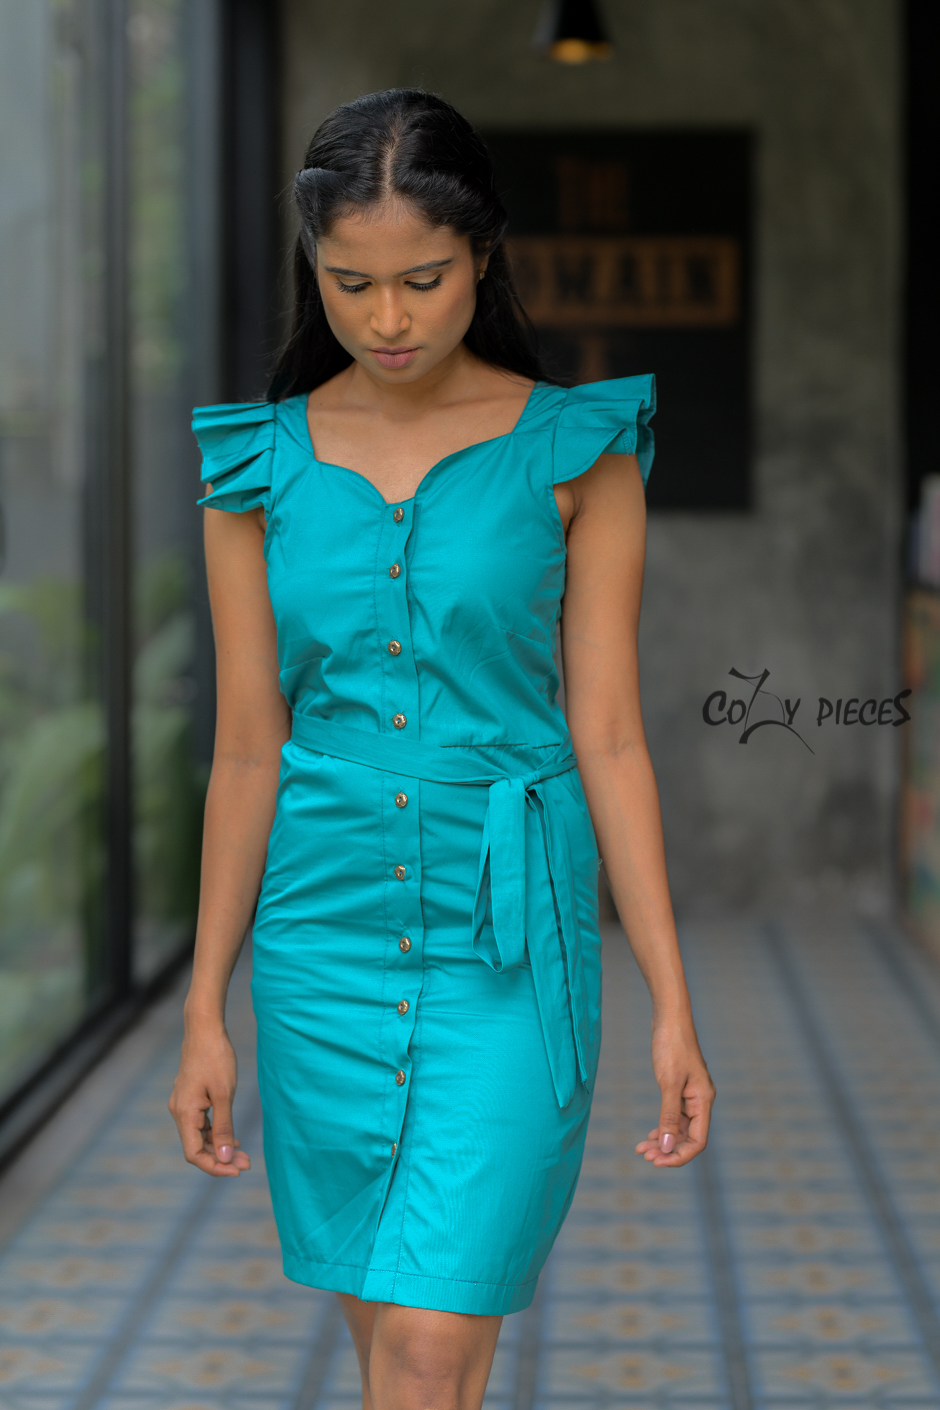 Jasmine - Sheath Dress is made of Turquoise Green Cotton and has buttons on front and with a sash belt